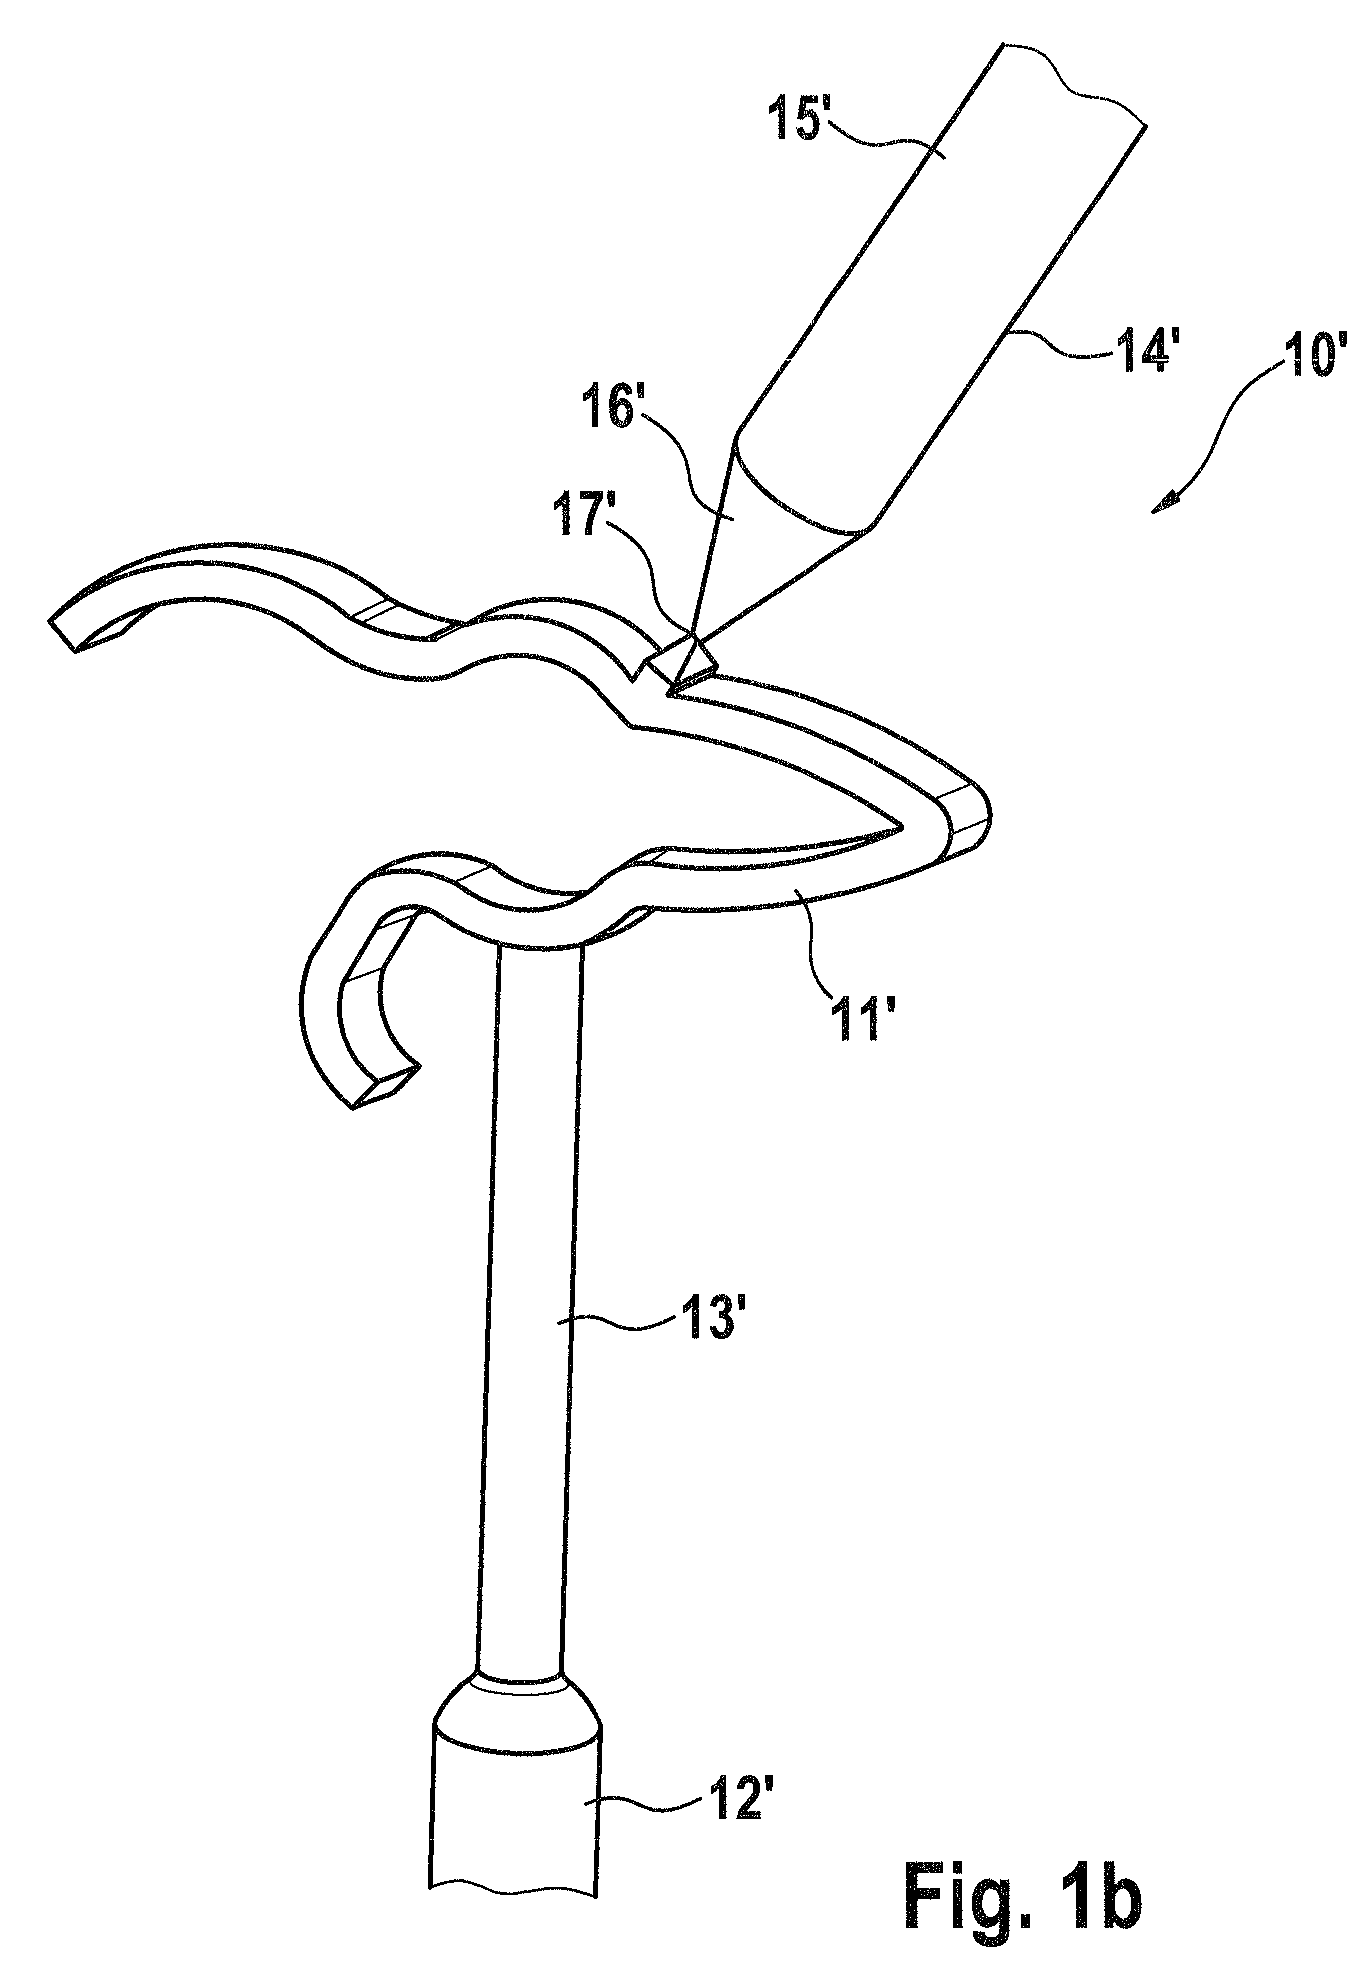 Passive ossicle prosthesis comprising applicator